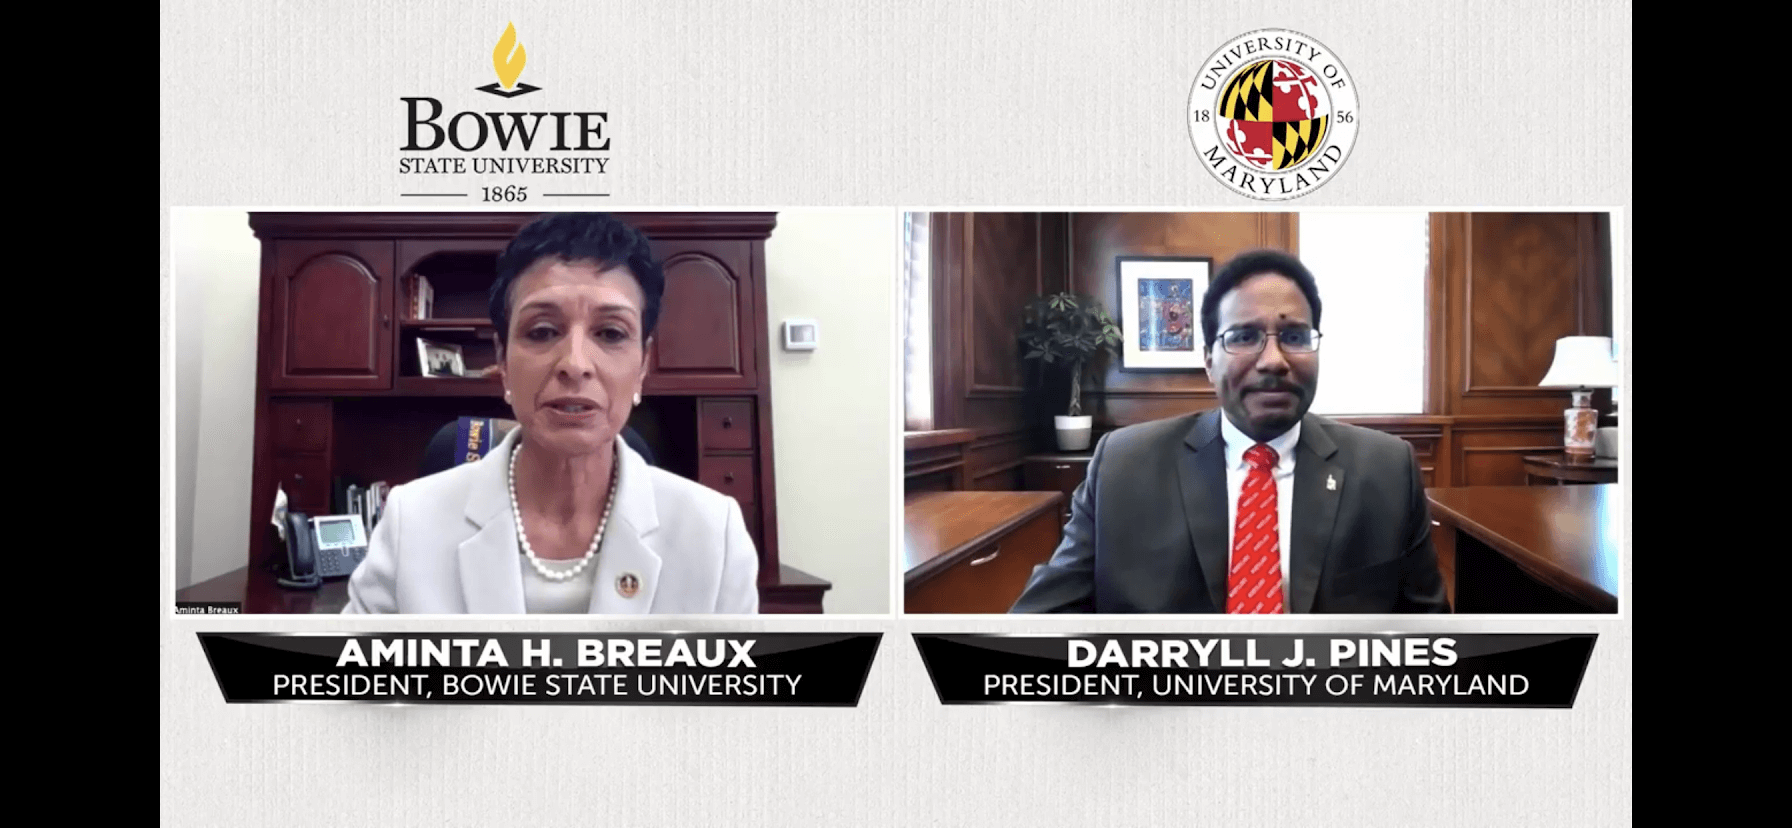 Aminta H. Breaux, President, Bowie State University, and Darryll J. Pines, President, University of Maryland